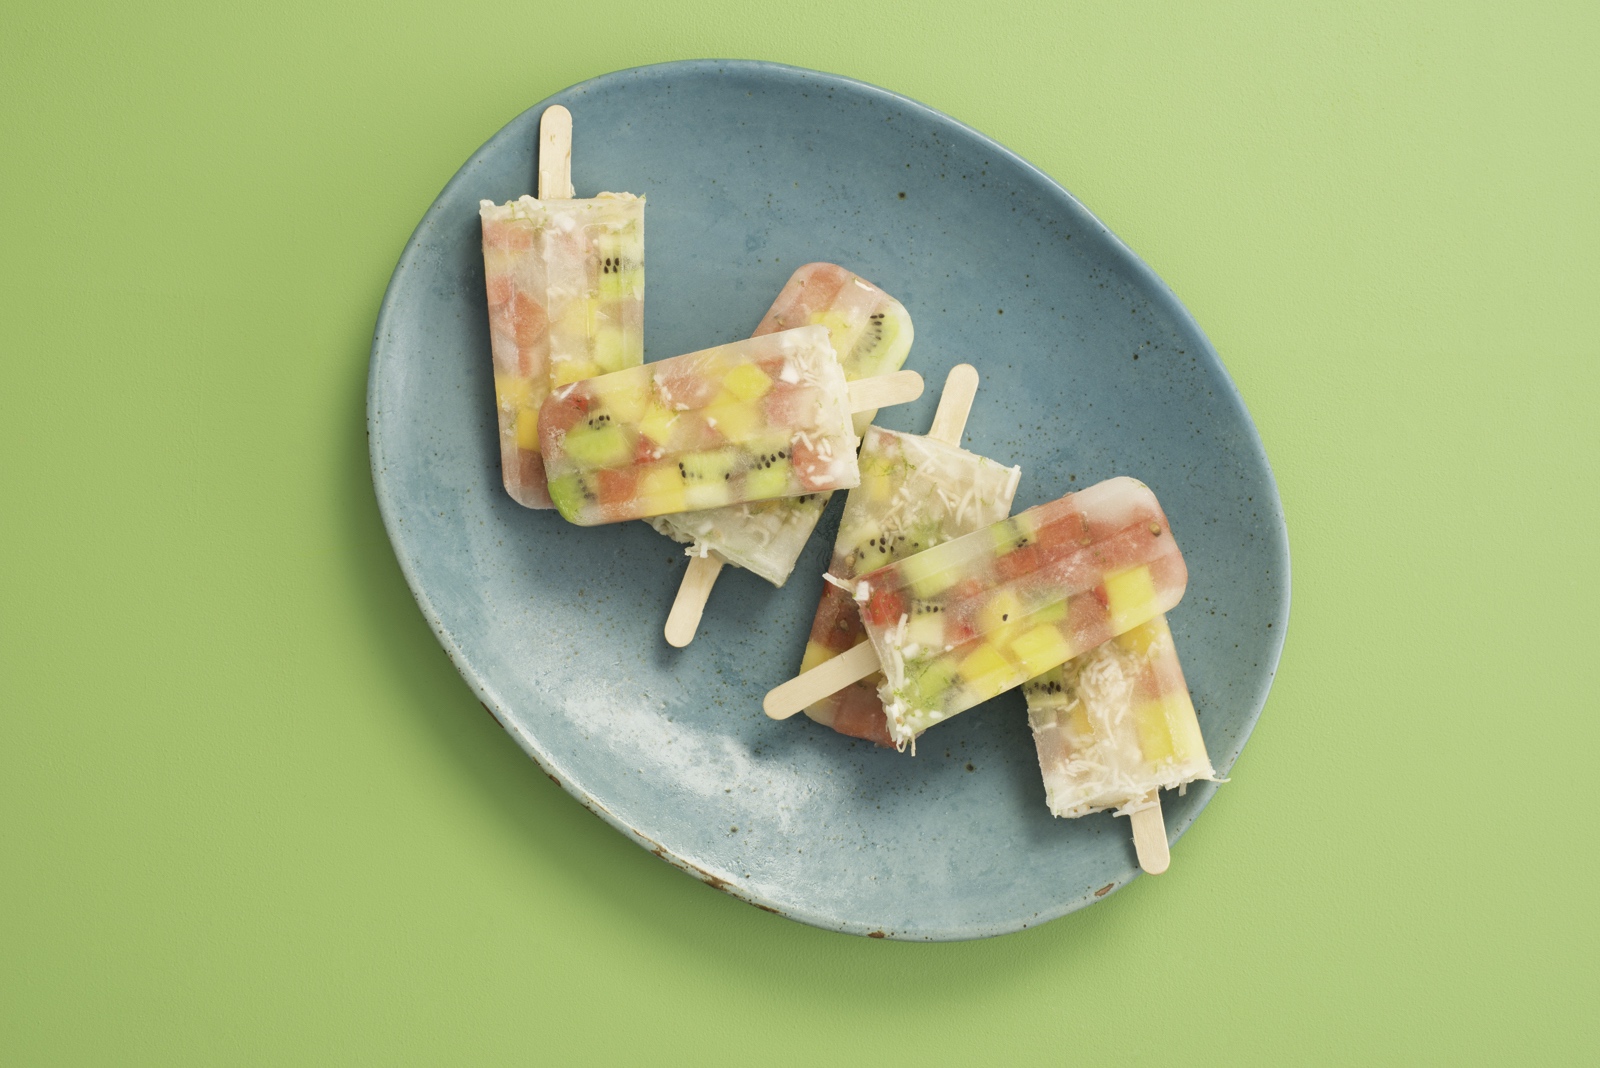 Do You Know How Much Sugar Is In That? Go for sugar-free popsicle recipes like this one!